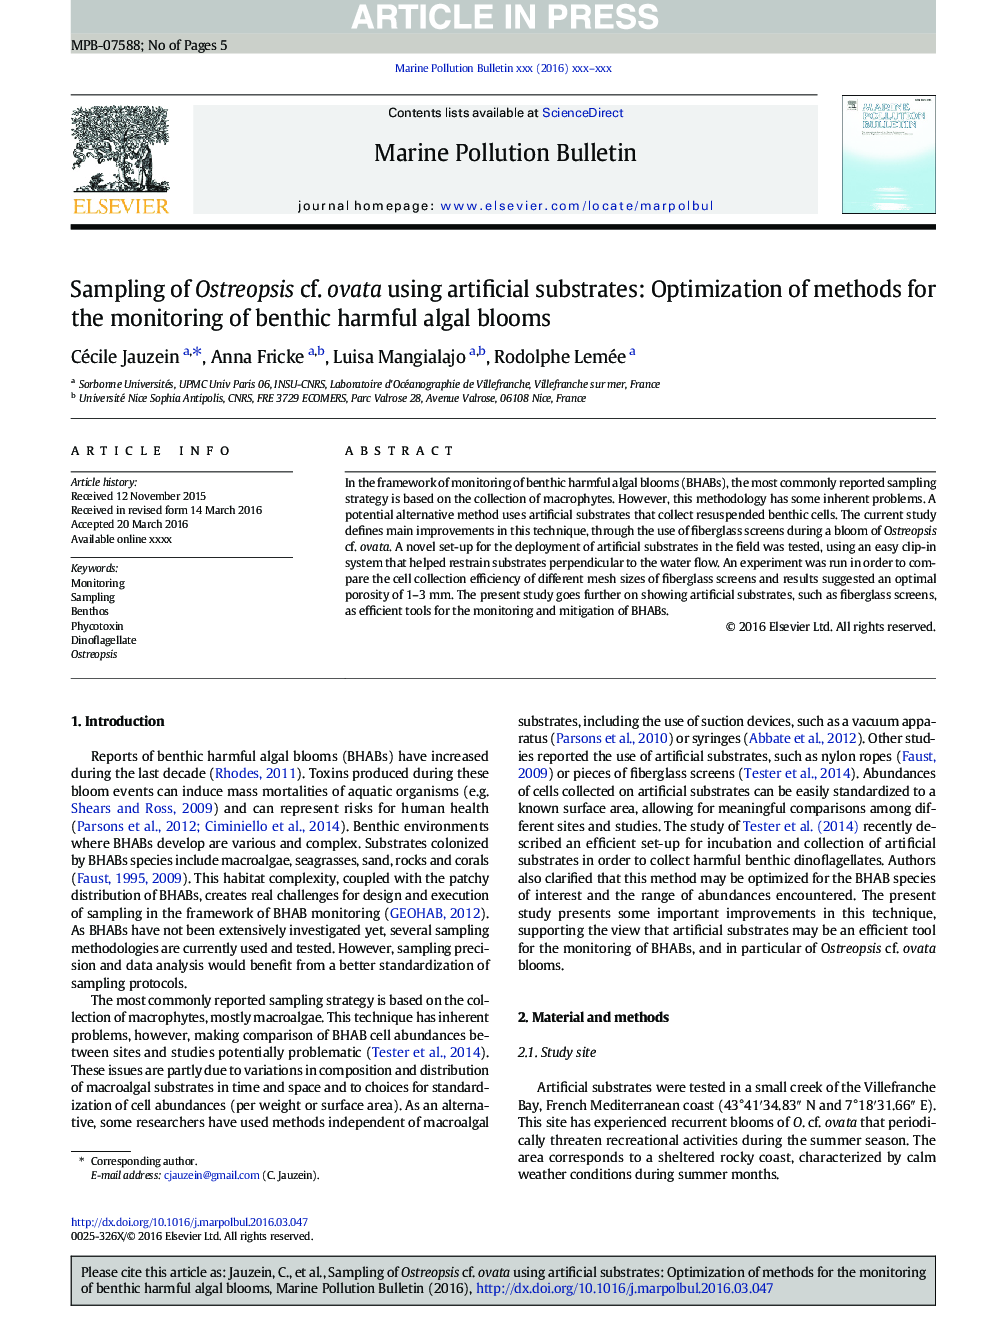 Sampling of Ostreopsis cf. ovata using artificial substrates: Optimization of methods for the monitoring of benthic harmful algal blooms